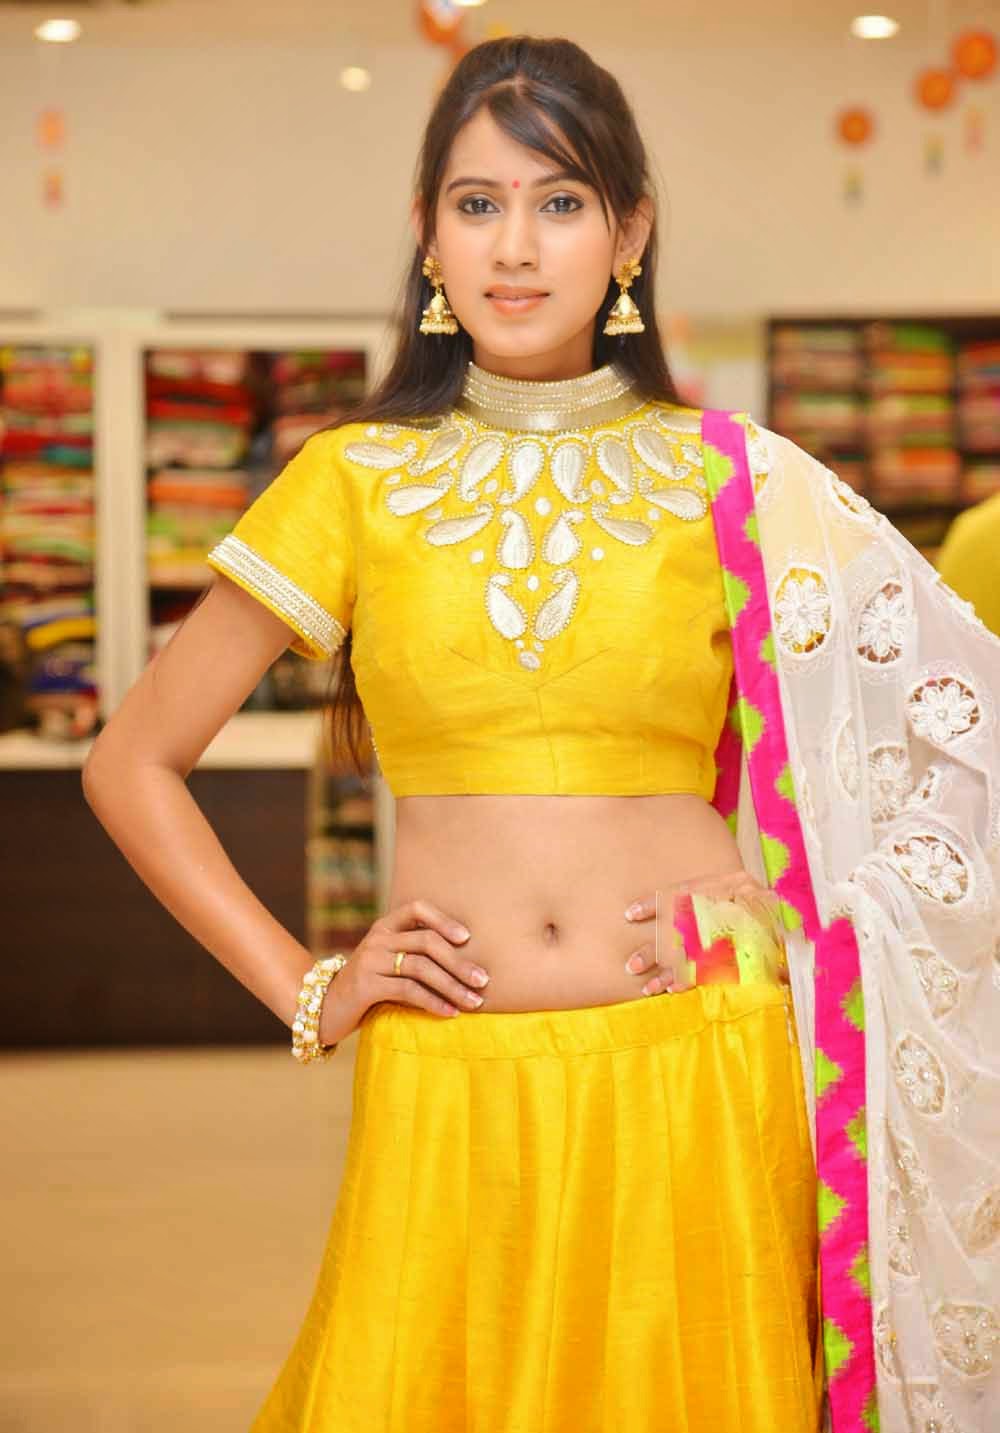 Honey Hot Sexy Navel Show In Store Opening Function PhotoShoot 8 Aaaapzk